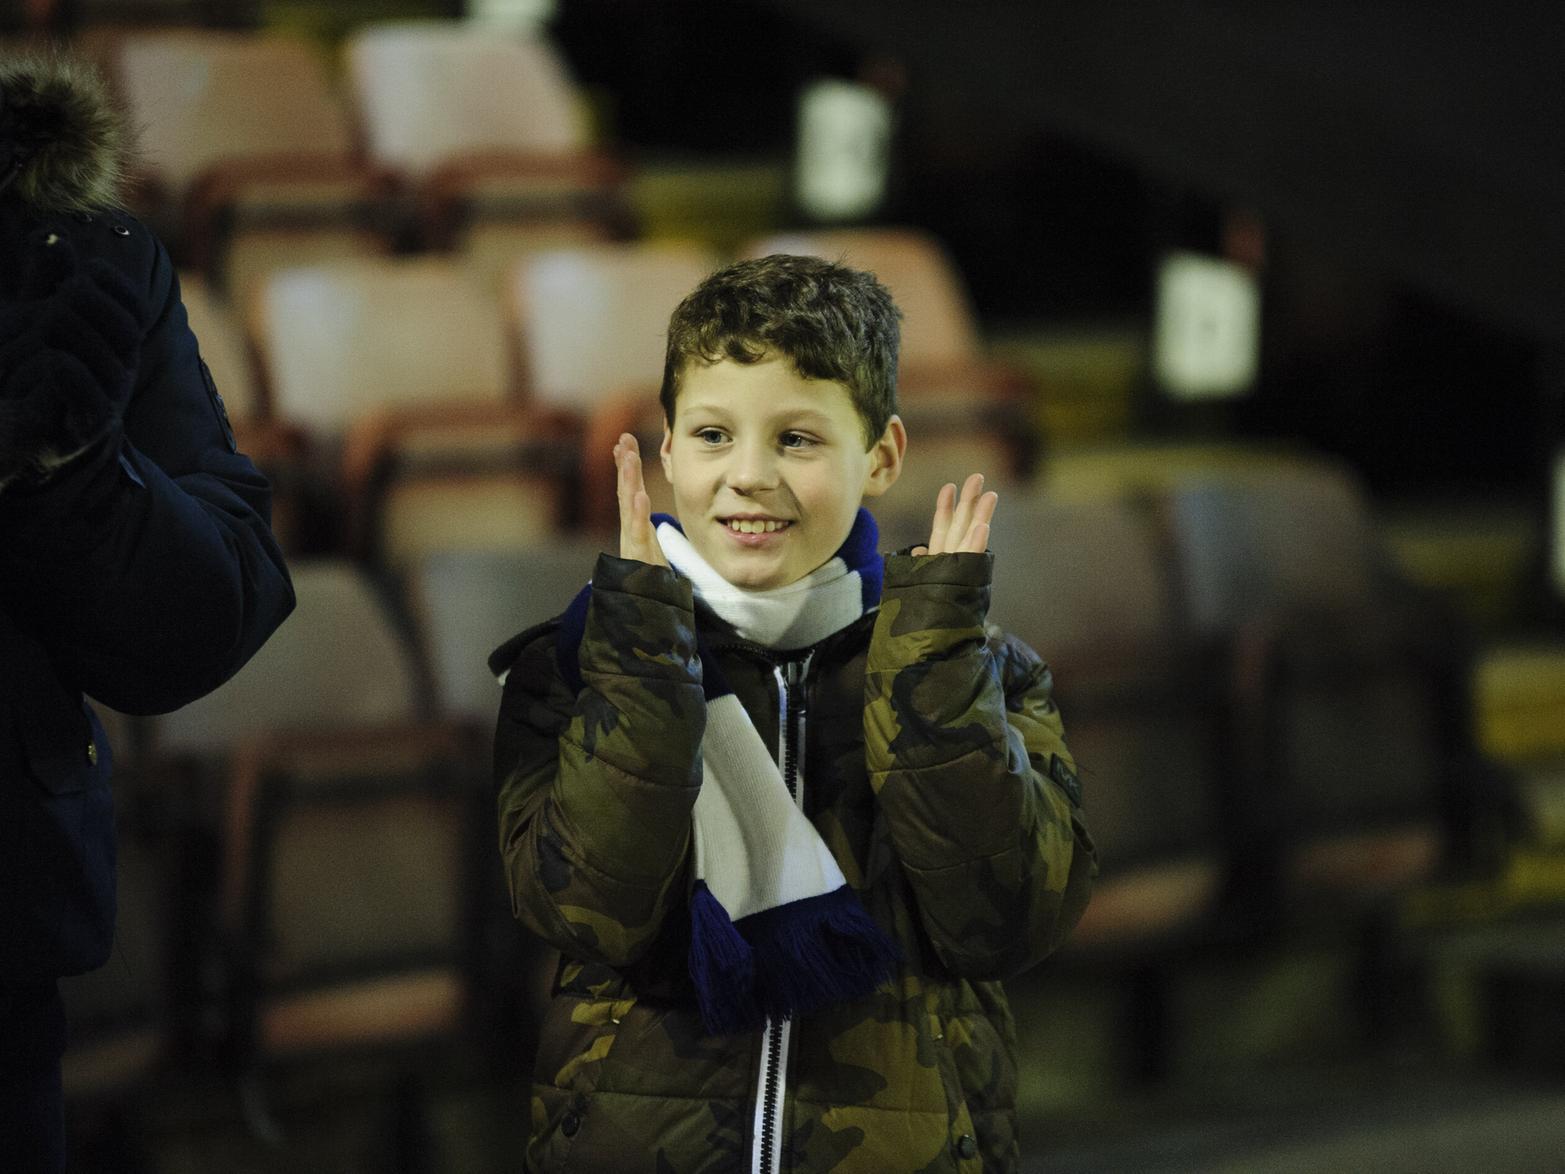 A young North Ender has a big smile as he's wrapped up to watch his side.